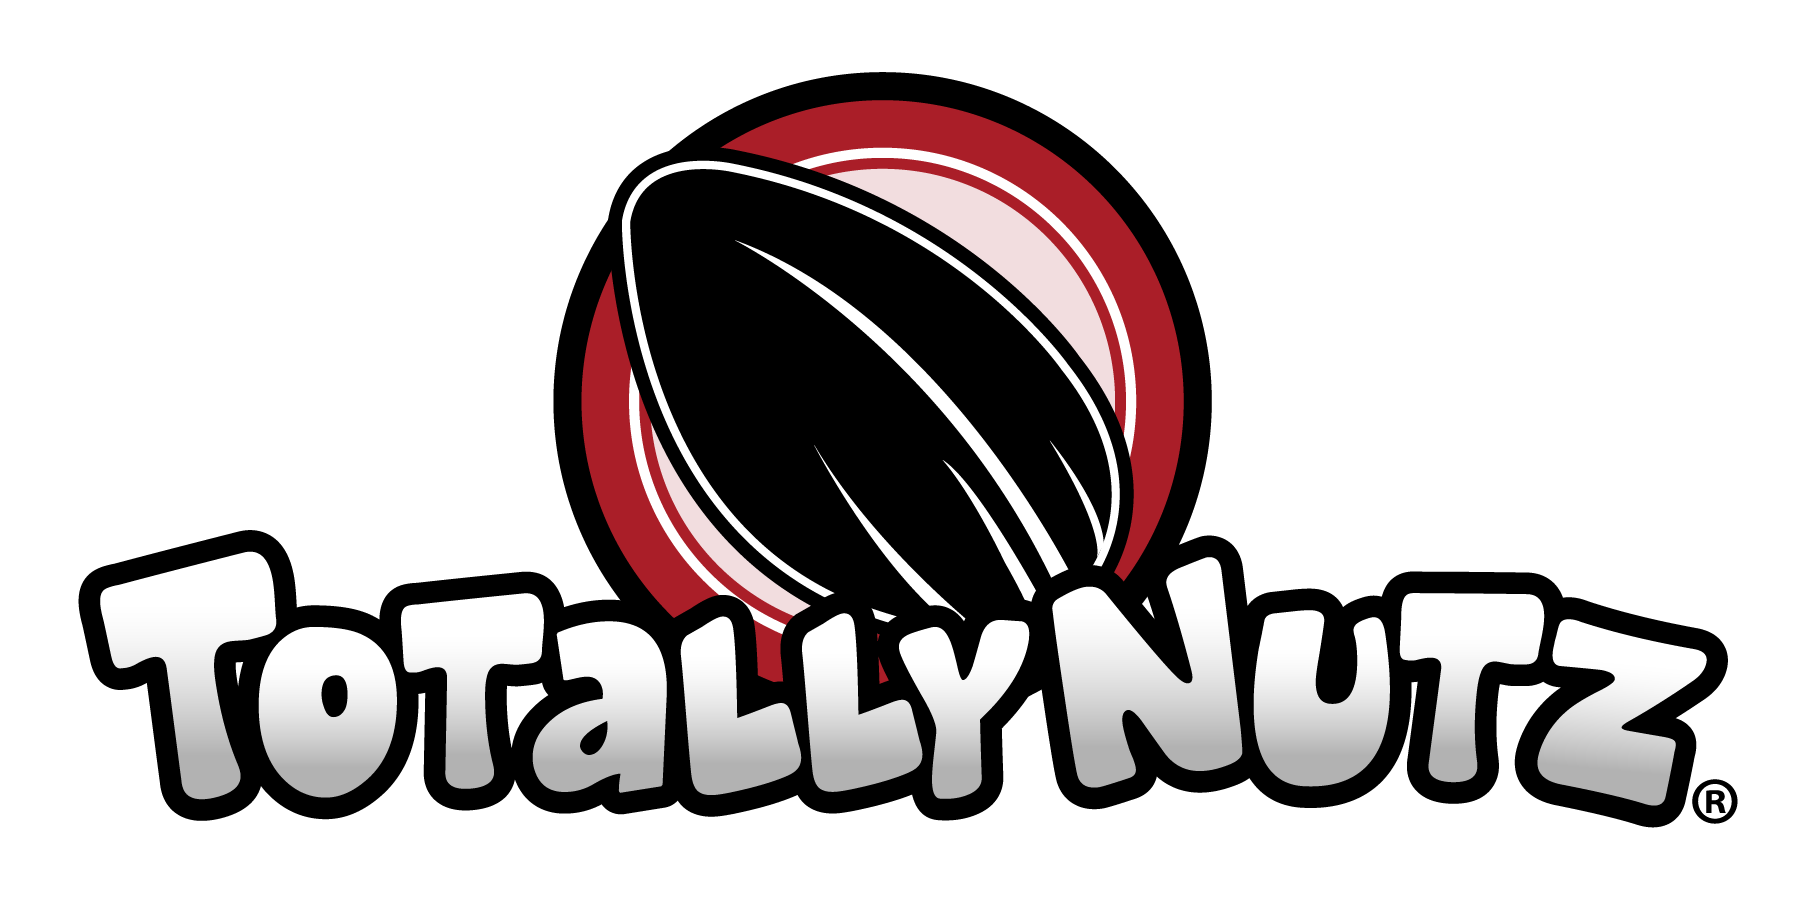 https://totallynutz.com/wp-content/uploads/2018/04/TotallyNutz_Logo_Color.png